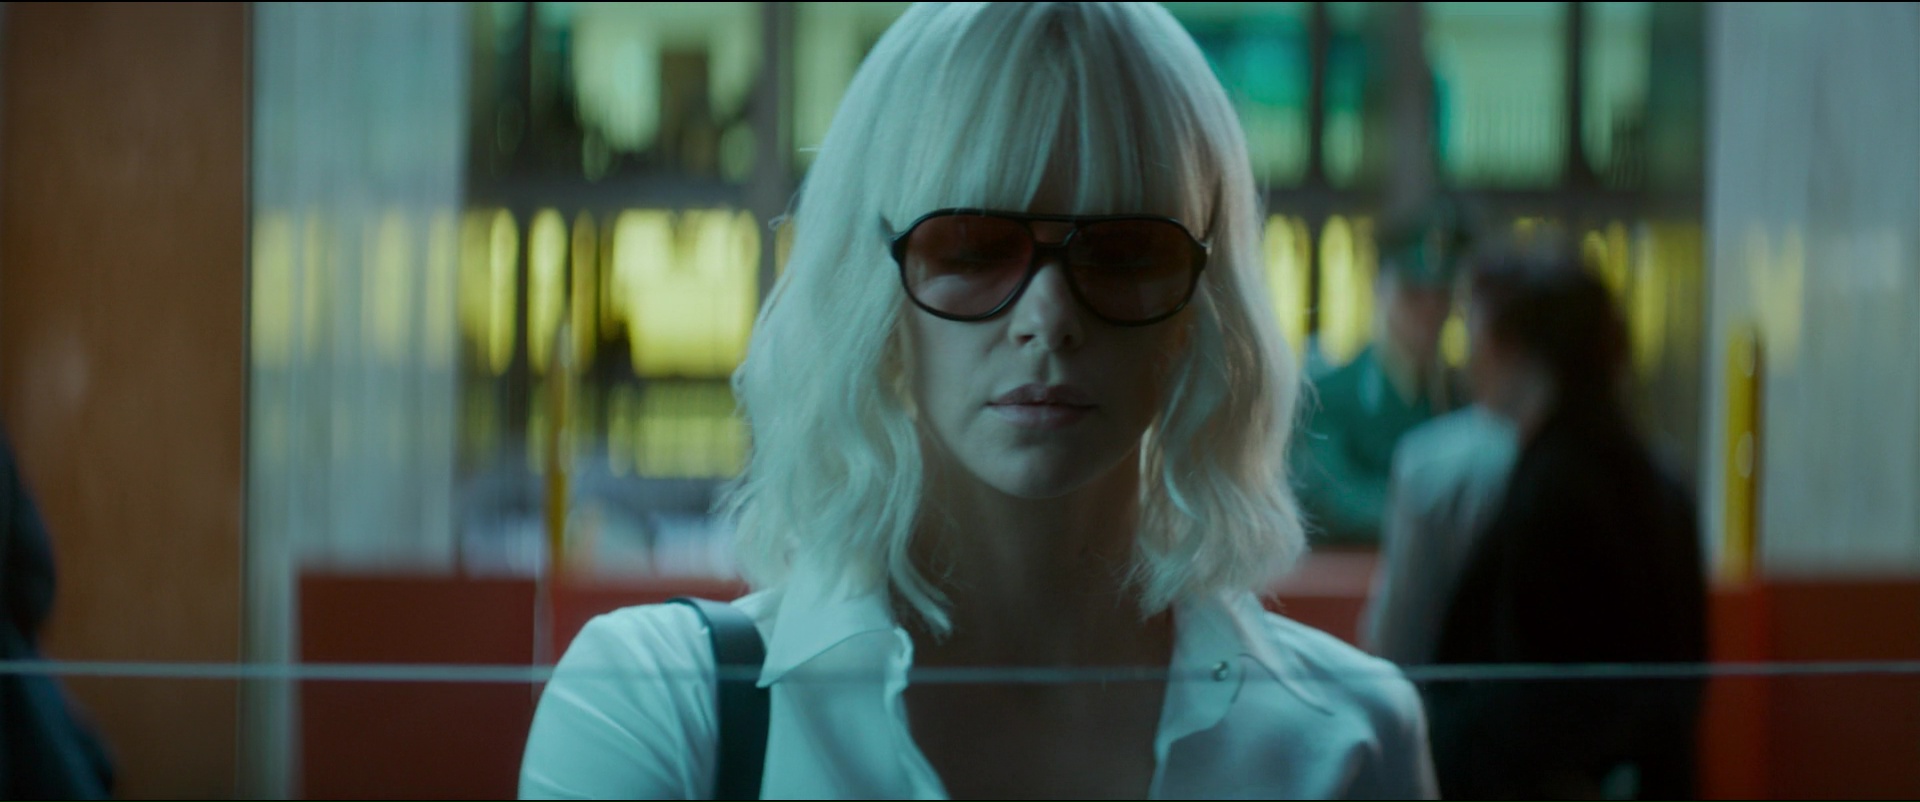 Ray-Ban RB 4125 Sunglasses Worn by Charlize Theron in Atomic Blonde (2017) ...